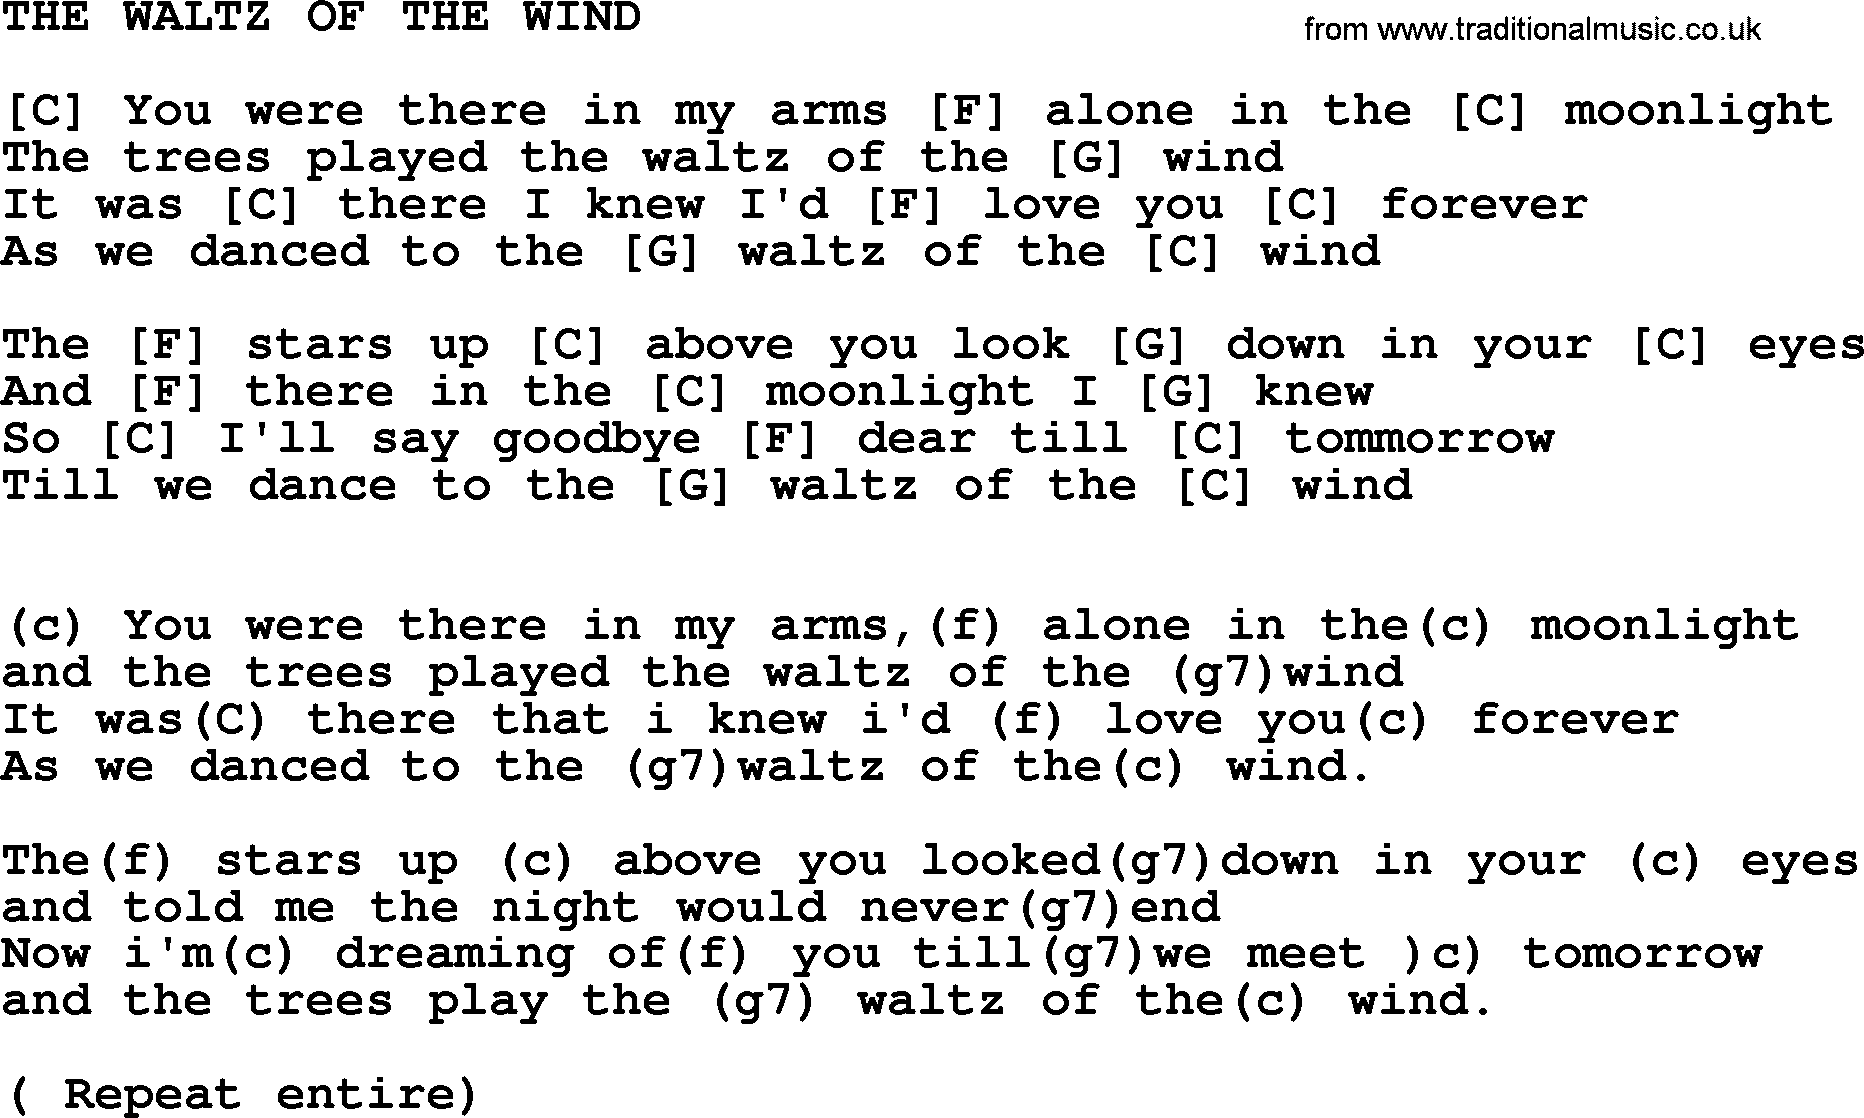 Hank Williams song The Waltz Of The Wind, lyrics and chords